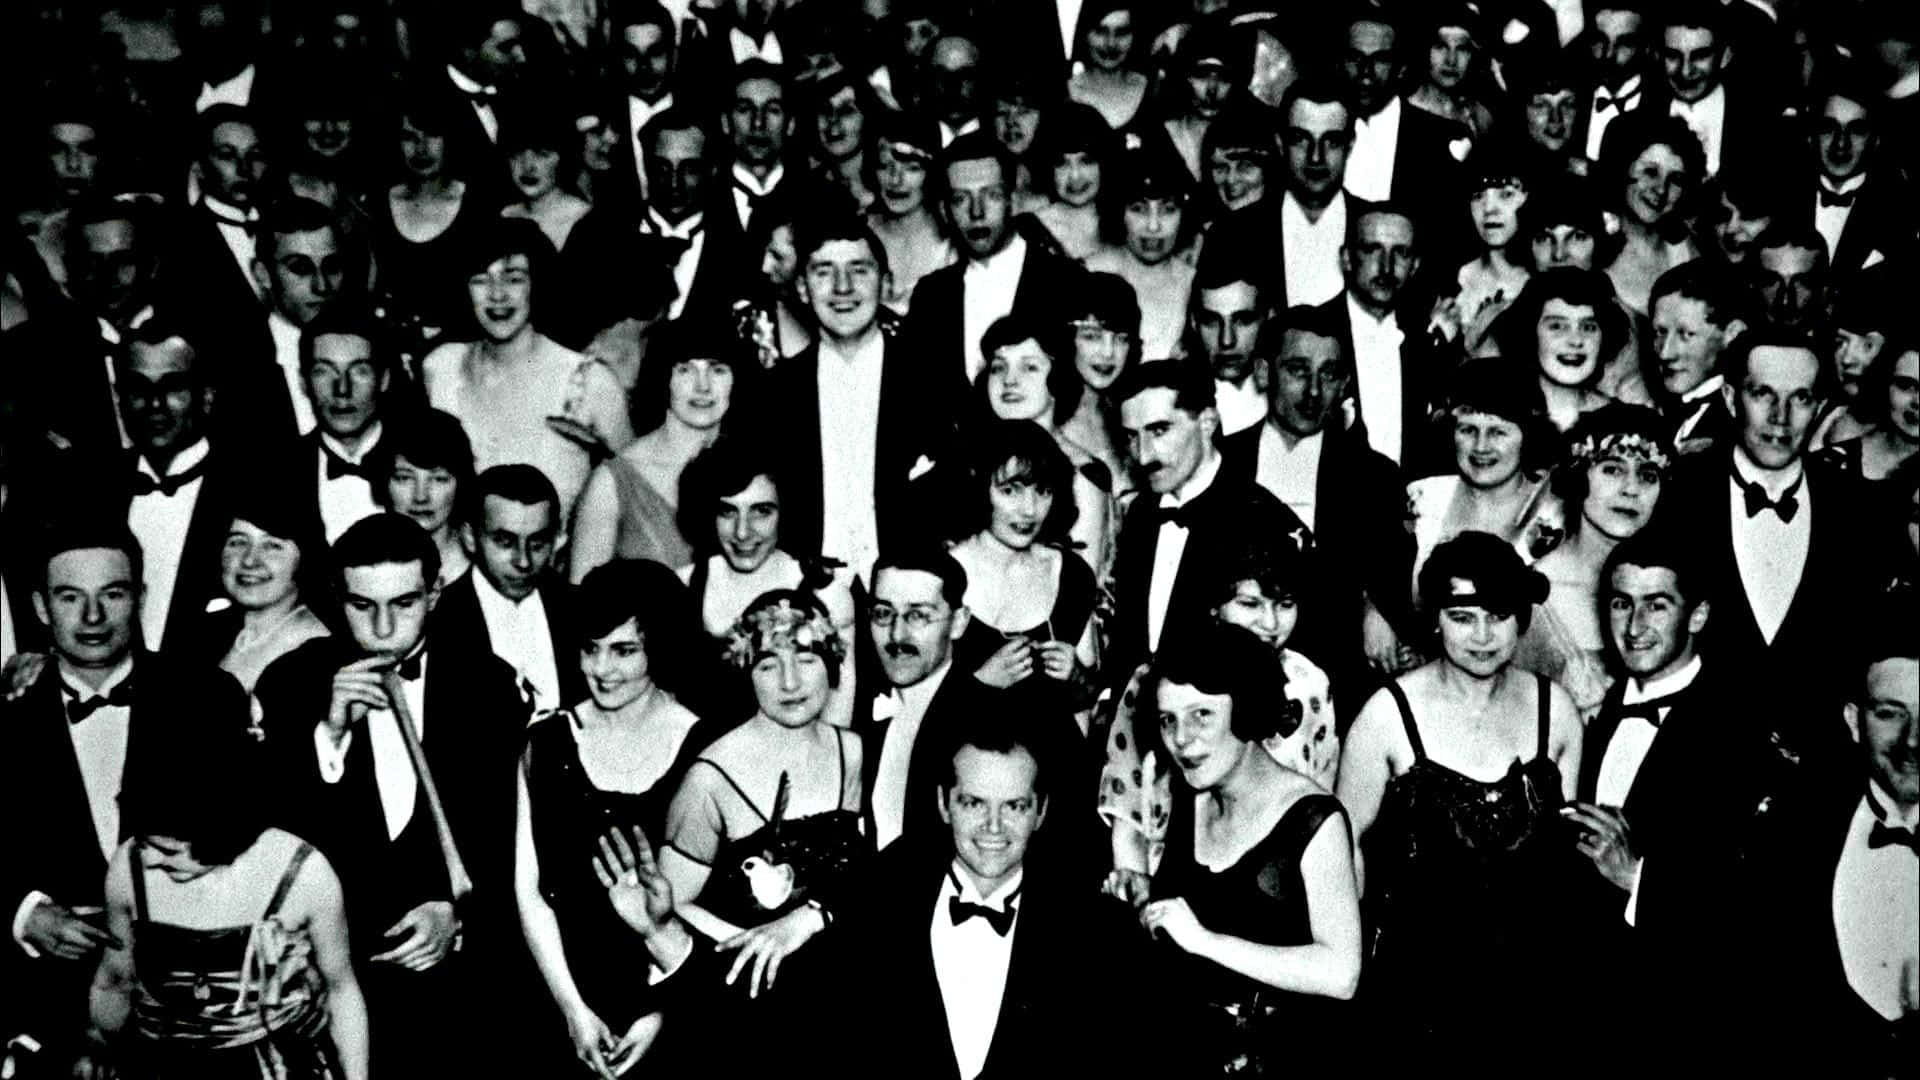 A Group Of People In Tuxedos And Tuxedos Background